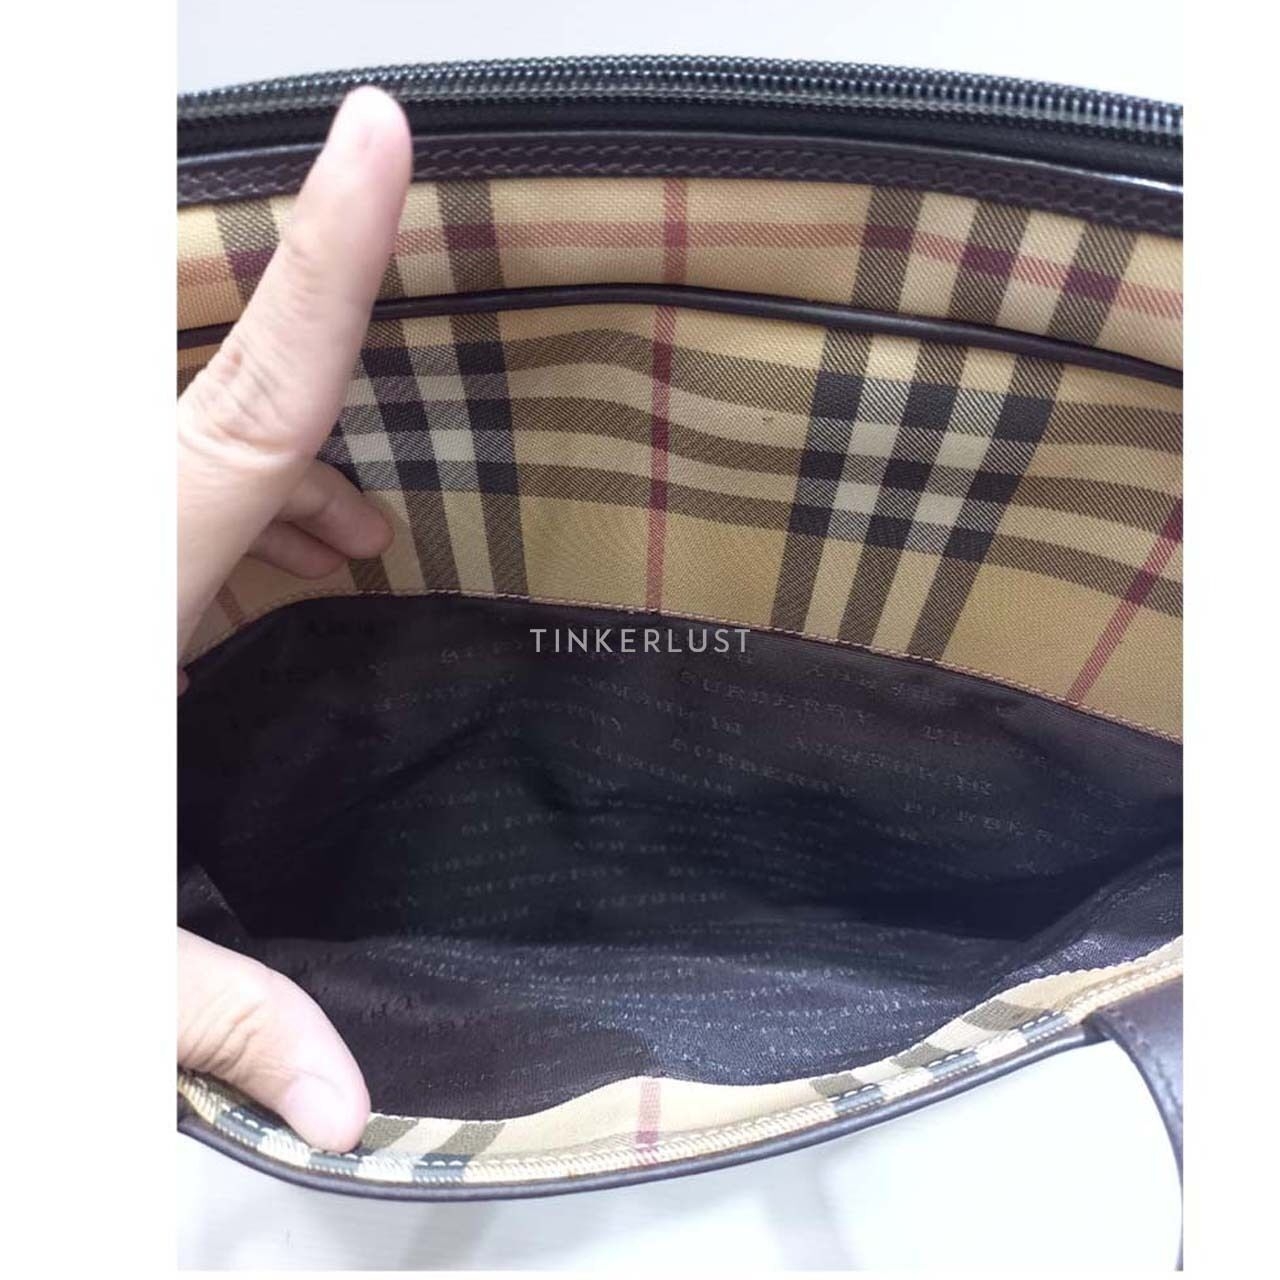 Burberry Box Vintage Canvas Leather Beige Tote Bag